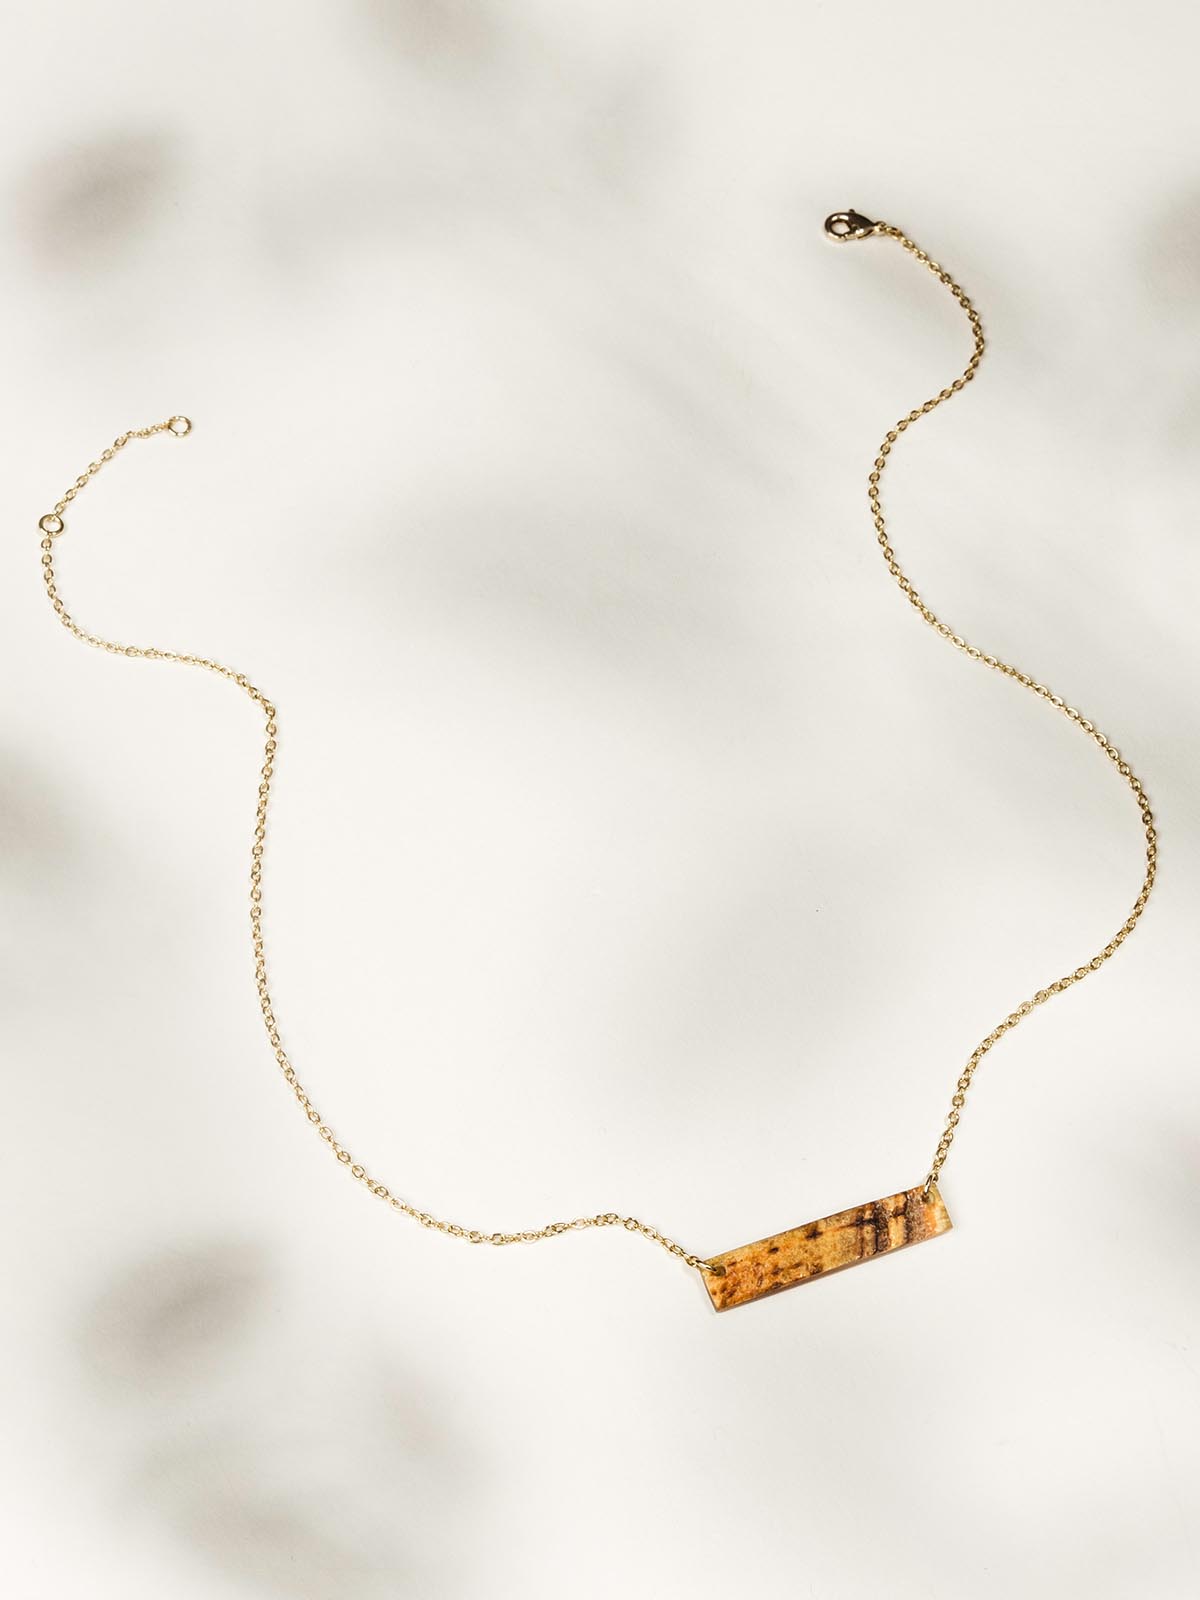 Medium length necklace with gold chain on a white background. Small rectangle textured pendant.